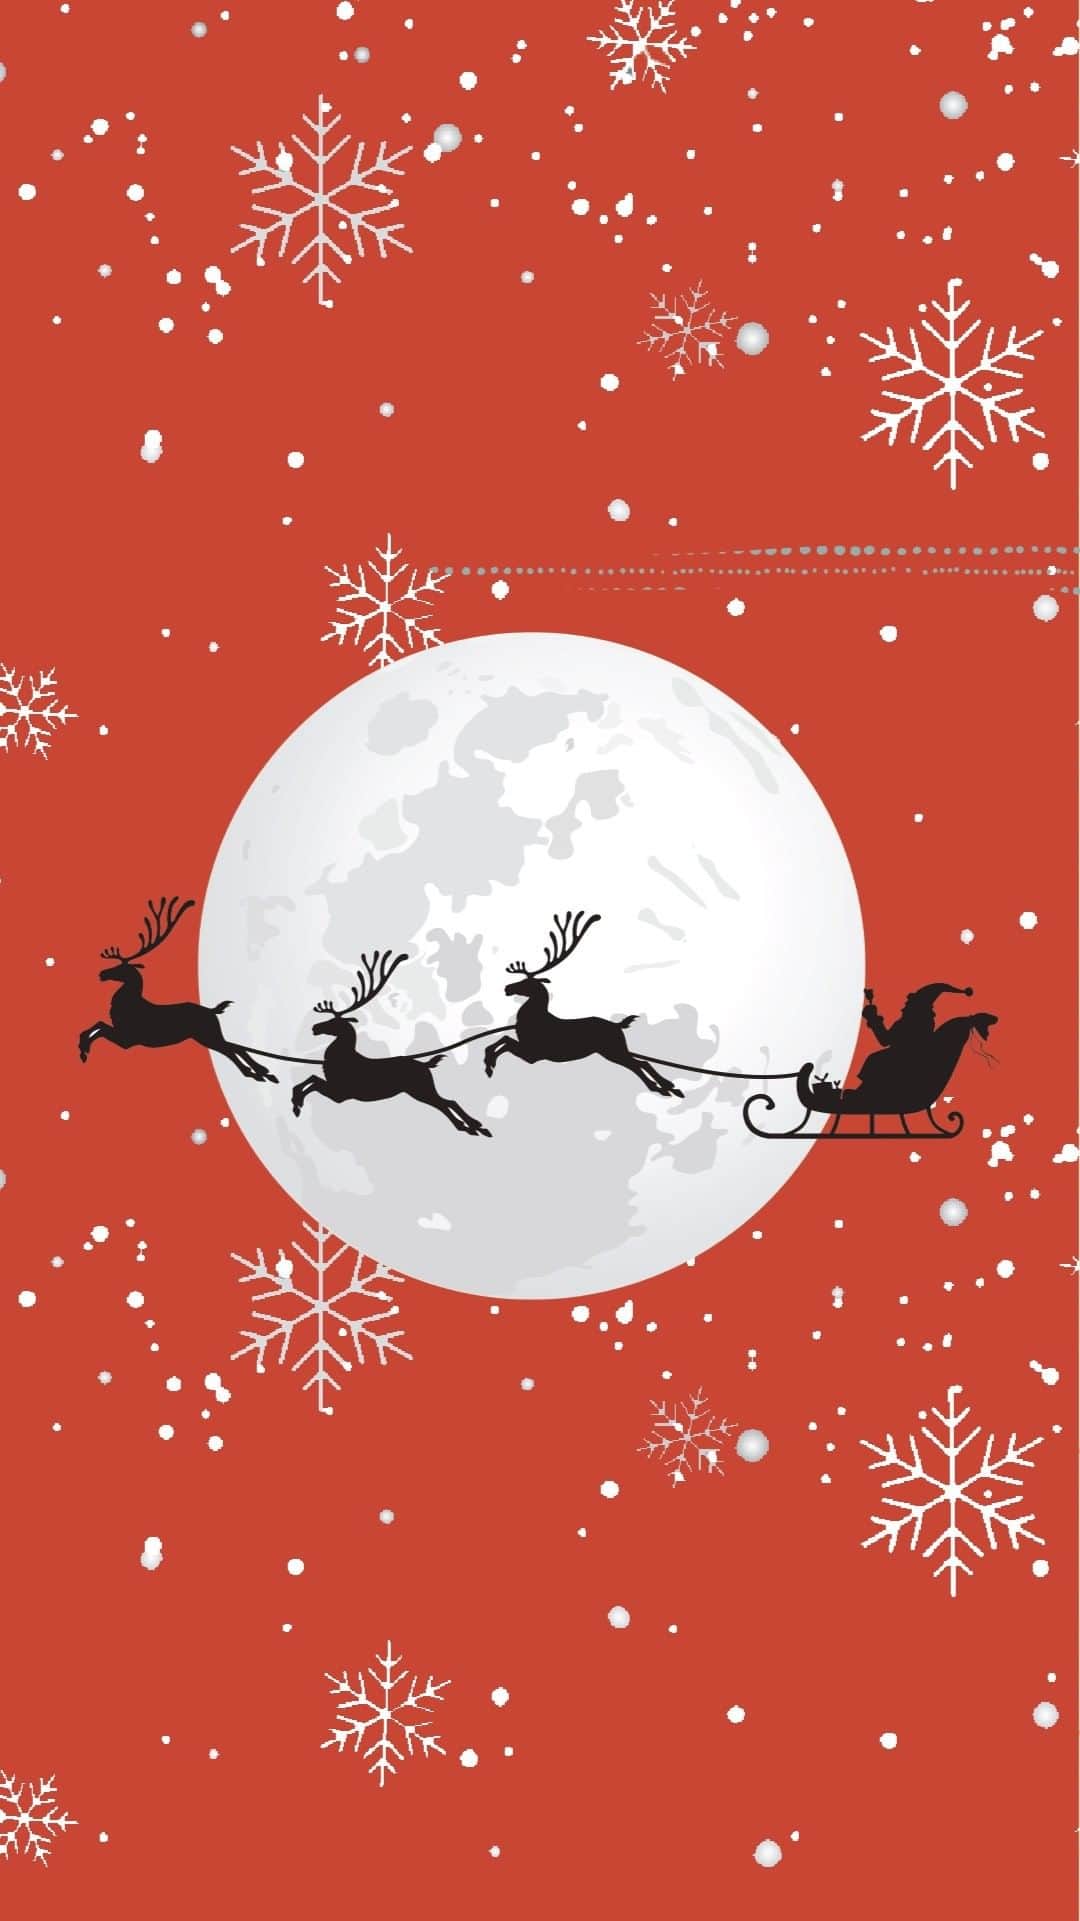 Oracle Corp. （オラクル）のインスタグラム：「Navigating through blizzards in a sleigh is no joke! With high-performance #computing, Santa’s elf-ineers could build a cloud-native weather app, running billions of route-changing calculations so #Santa can deliver presents in the nick of time. #ChristmasEve」